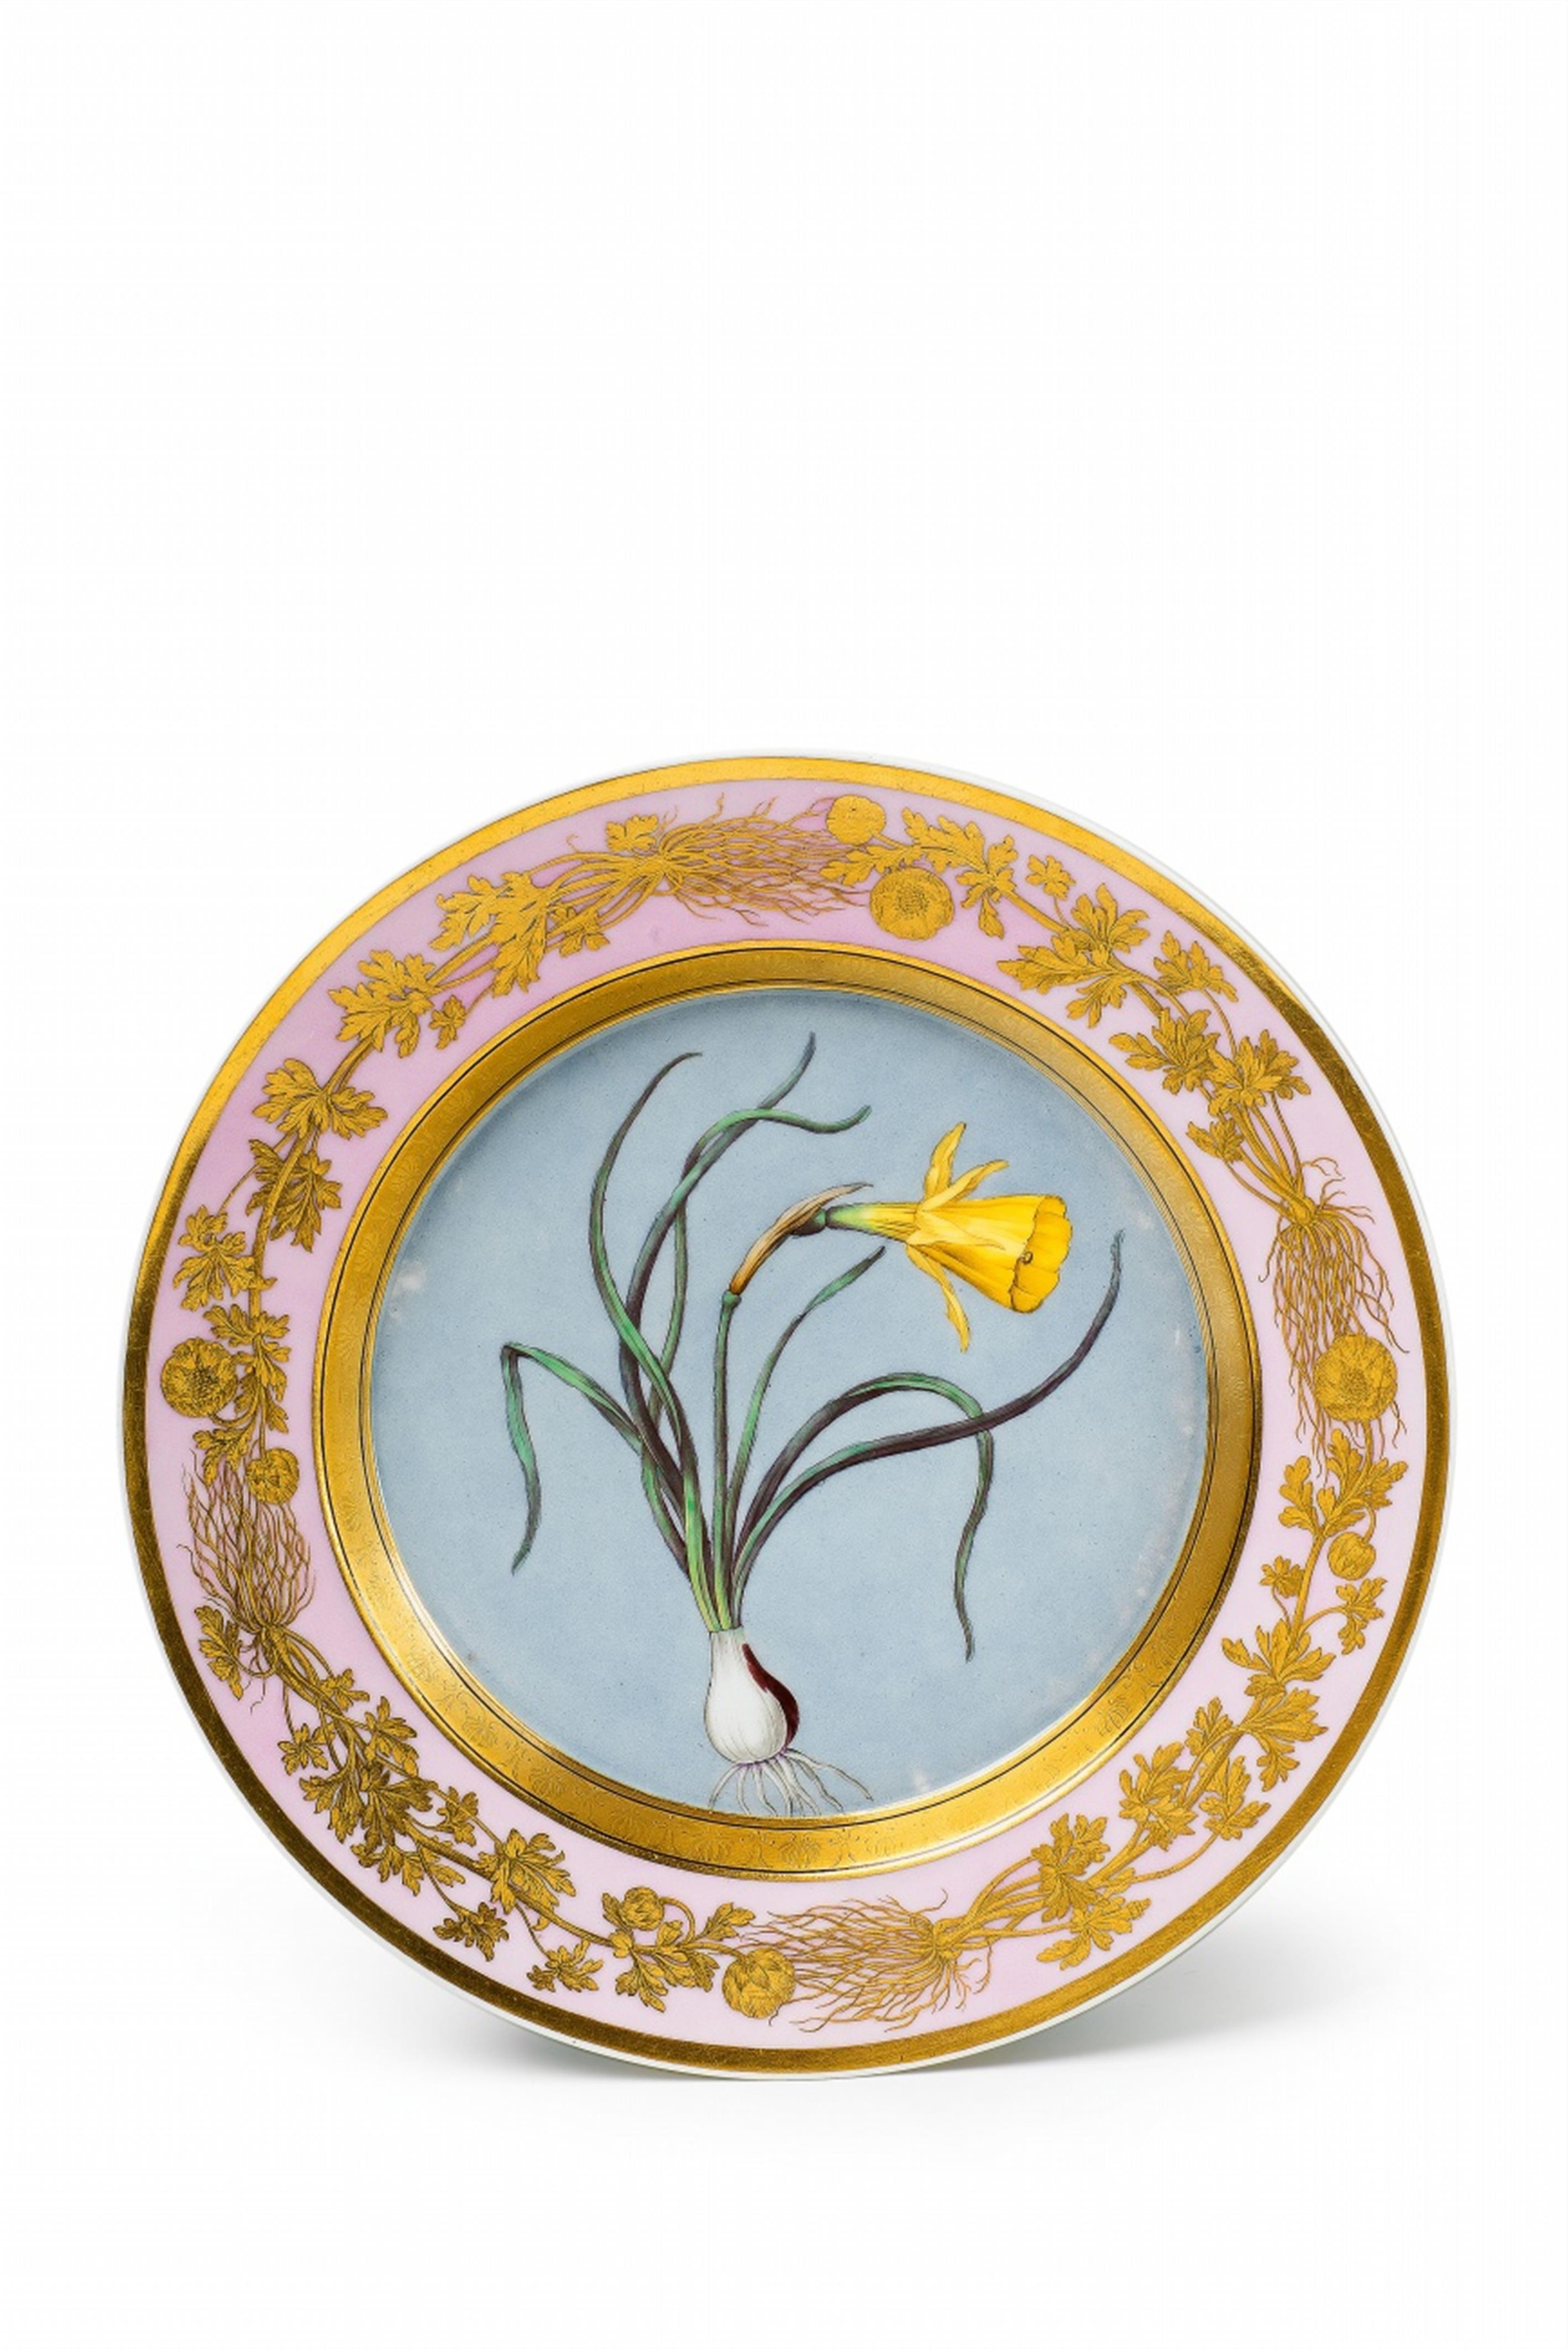 A Berlin KPM porcelain plate with a petticoat daffodil - image-1